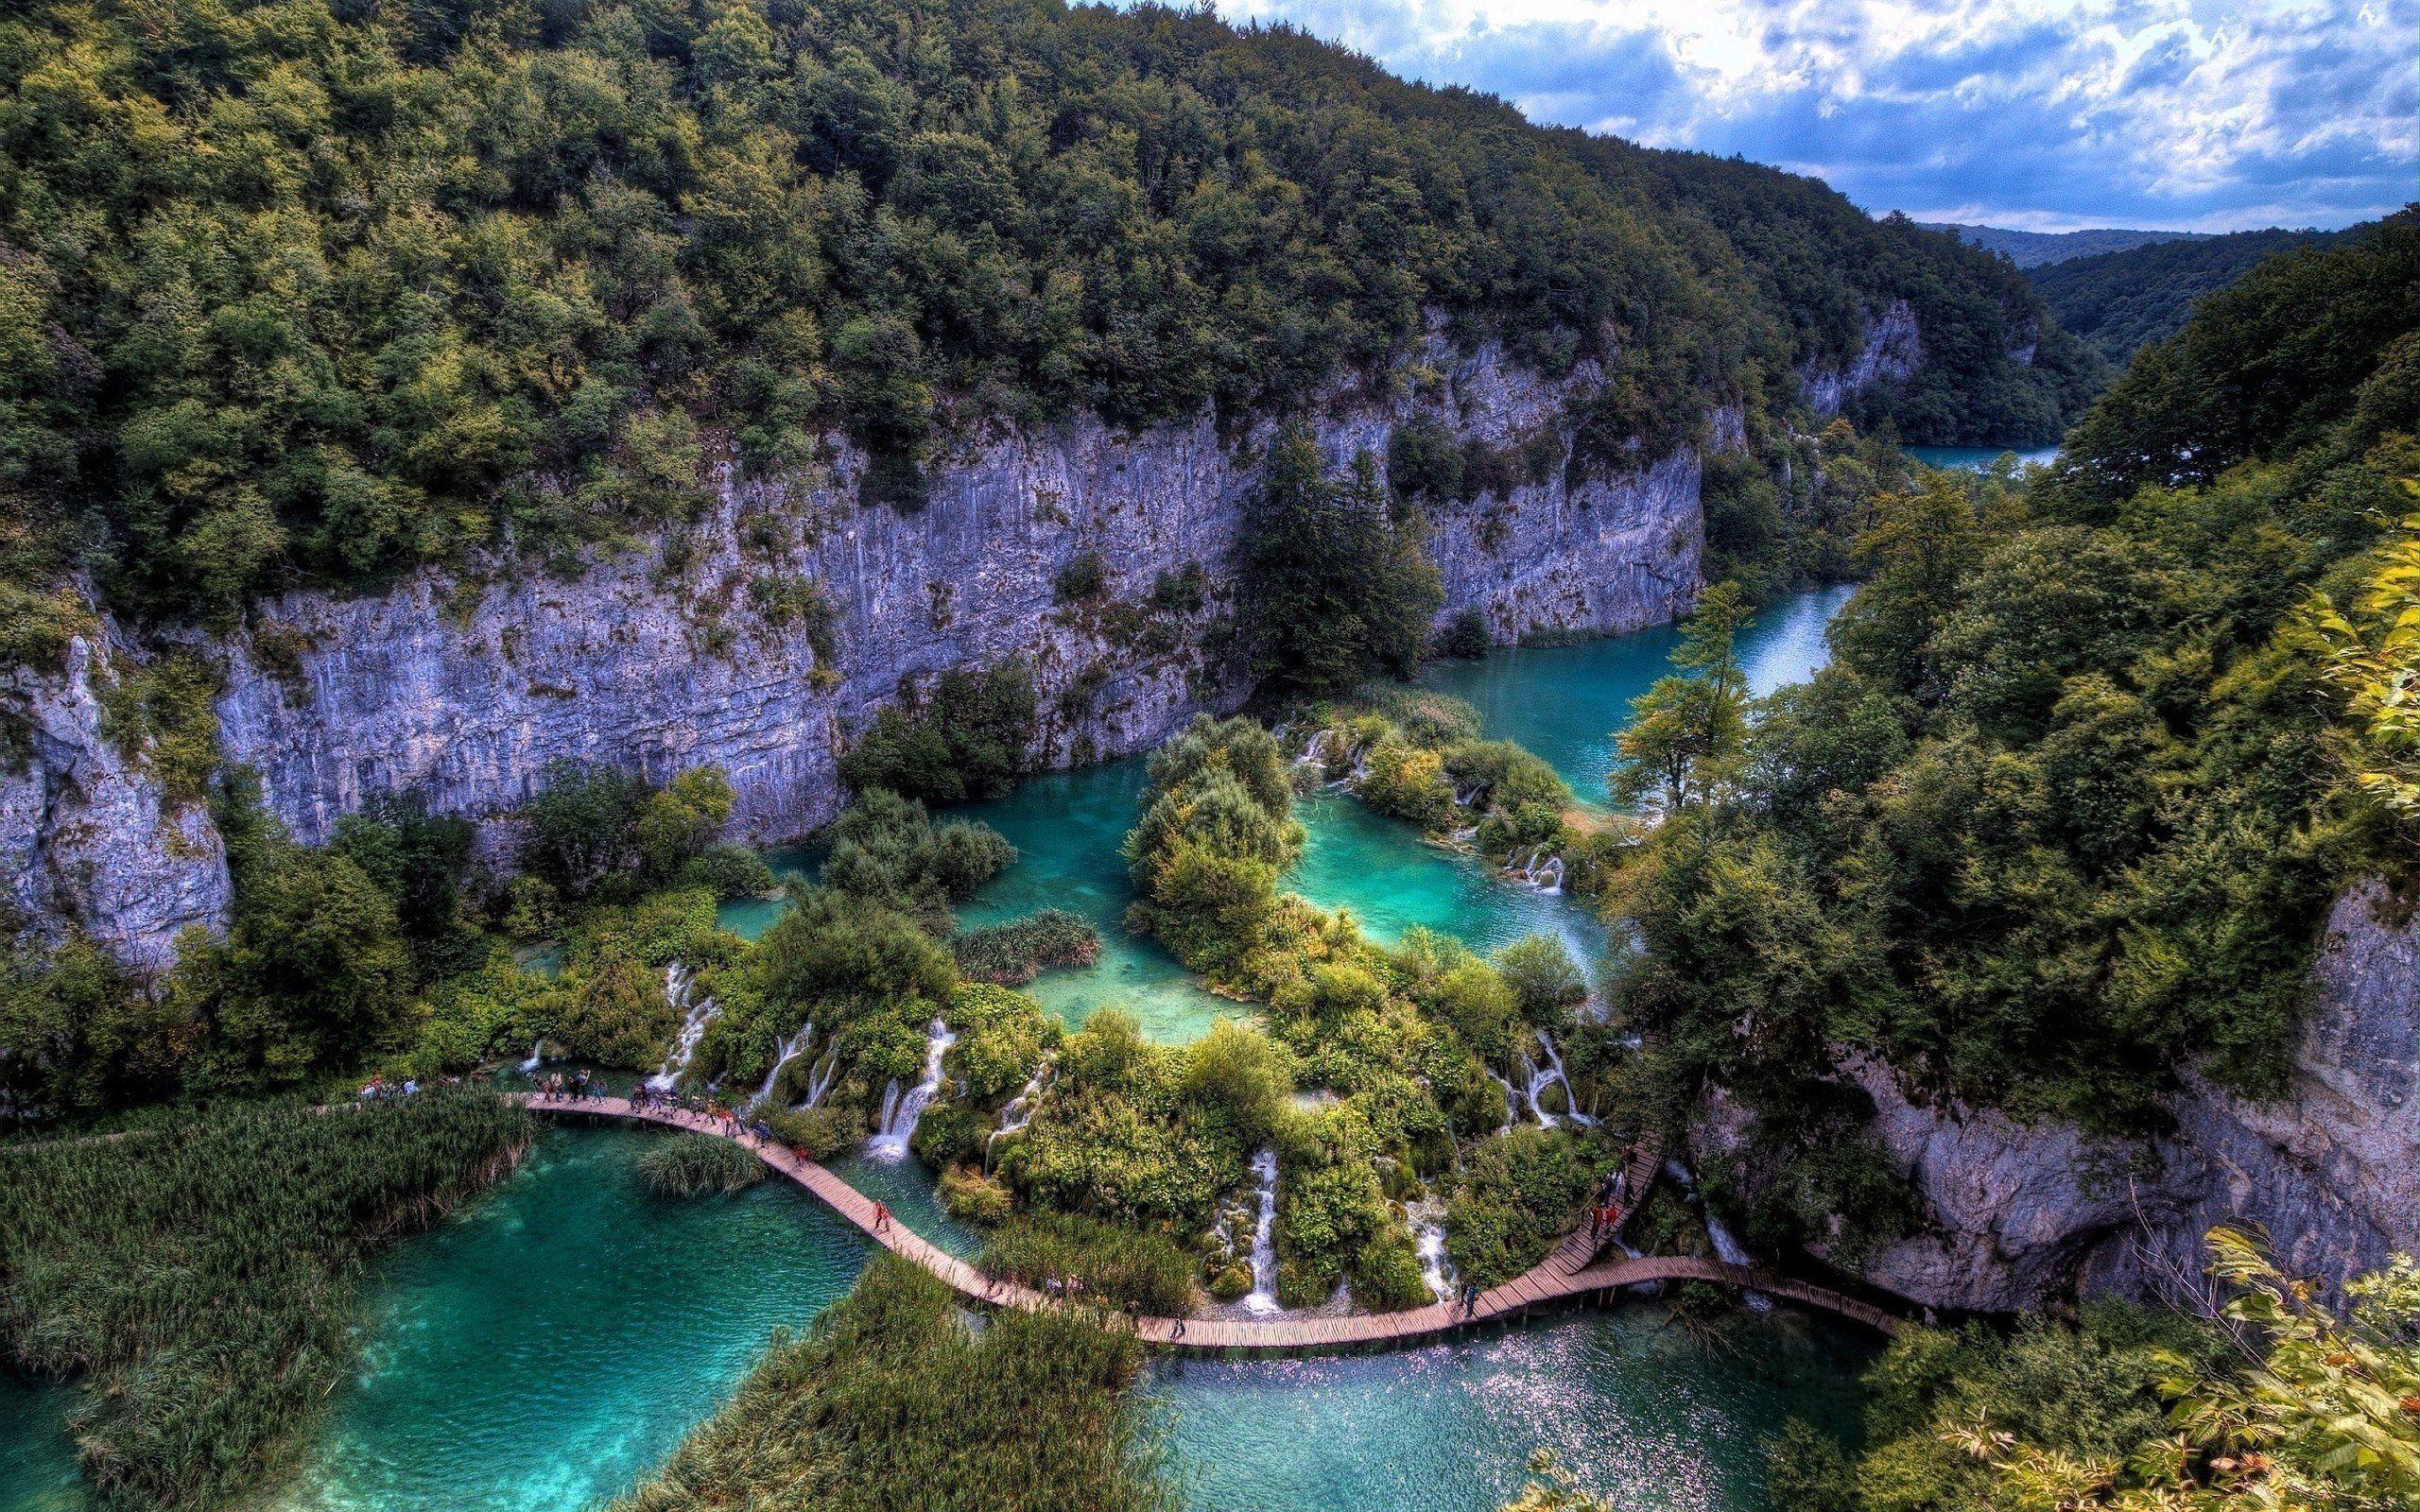 2560x1600 Download wallpaper croatia, plitvice lakes, park for desktop with resolution 2560x1600. High Quality HD picture wallpaper